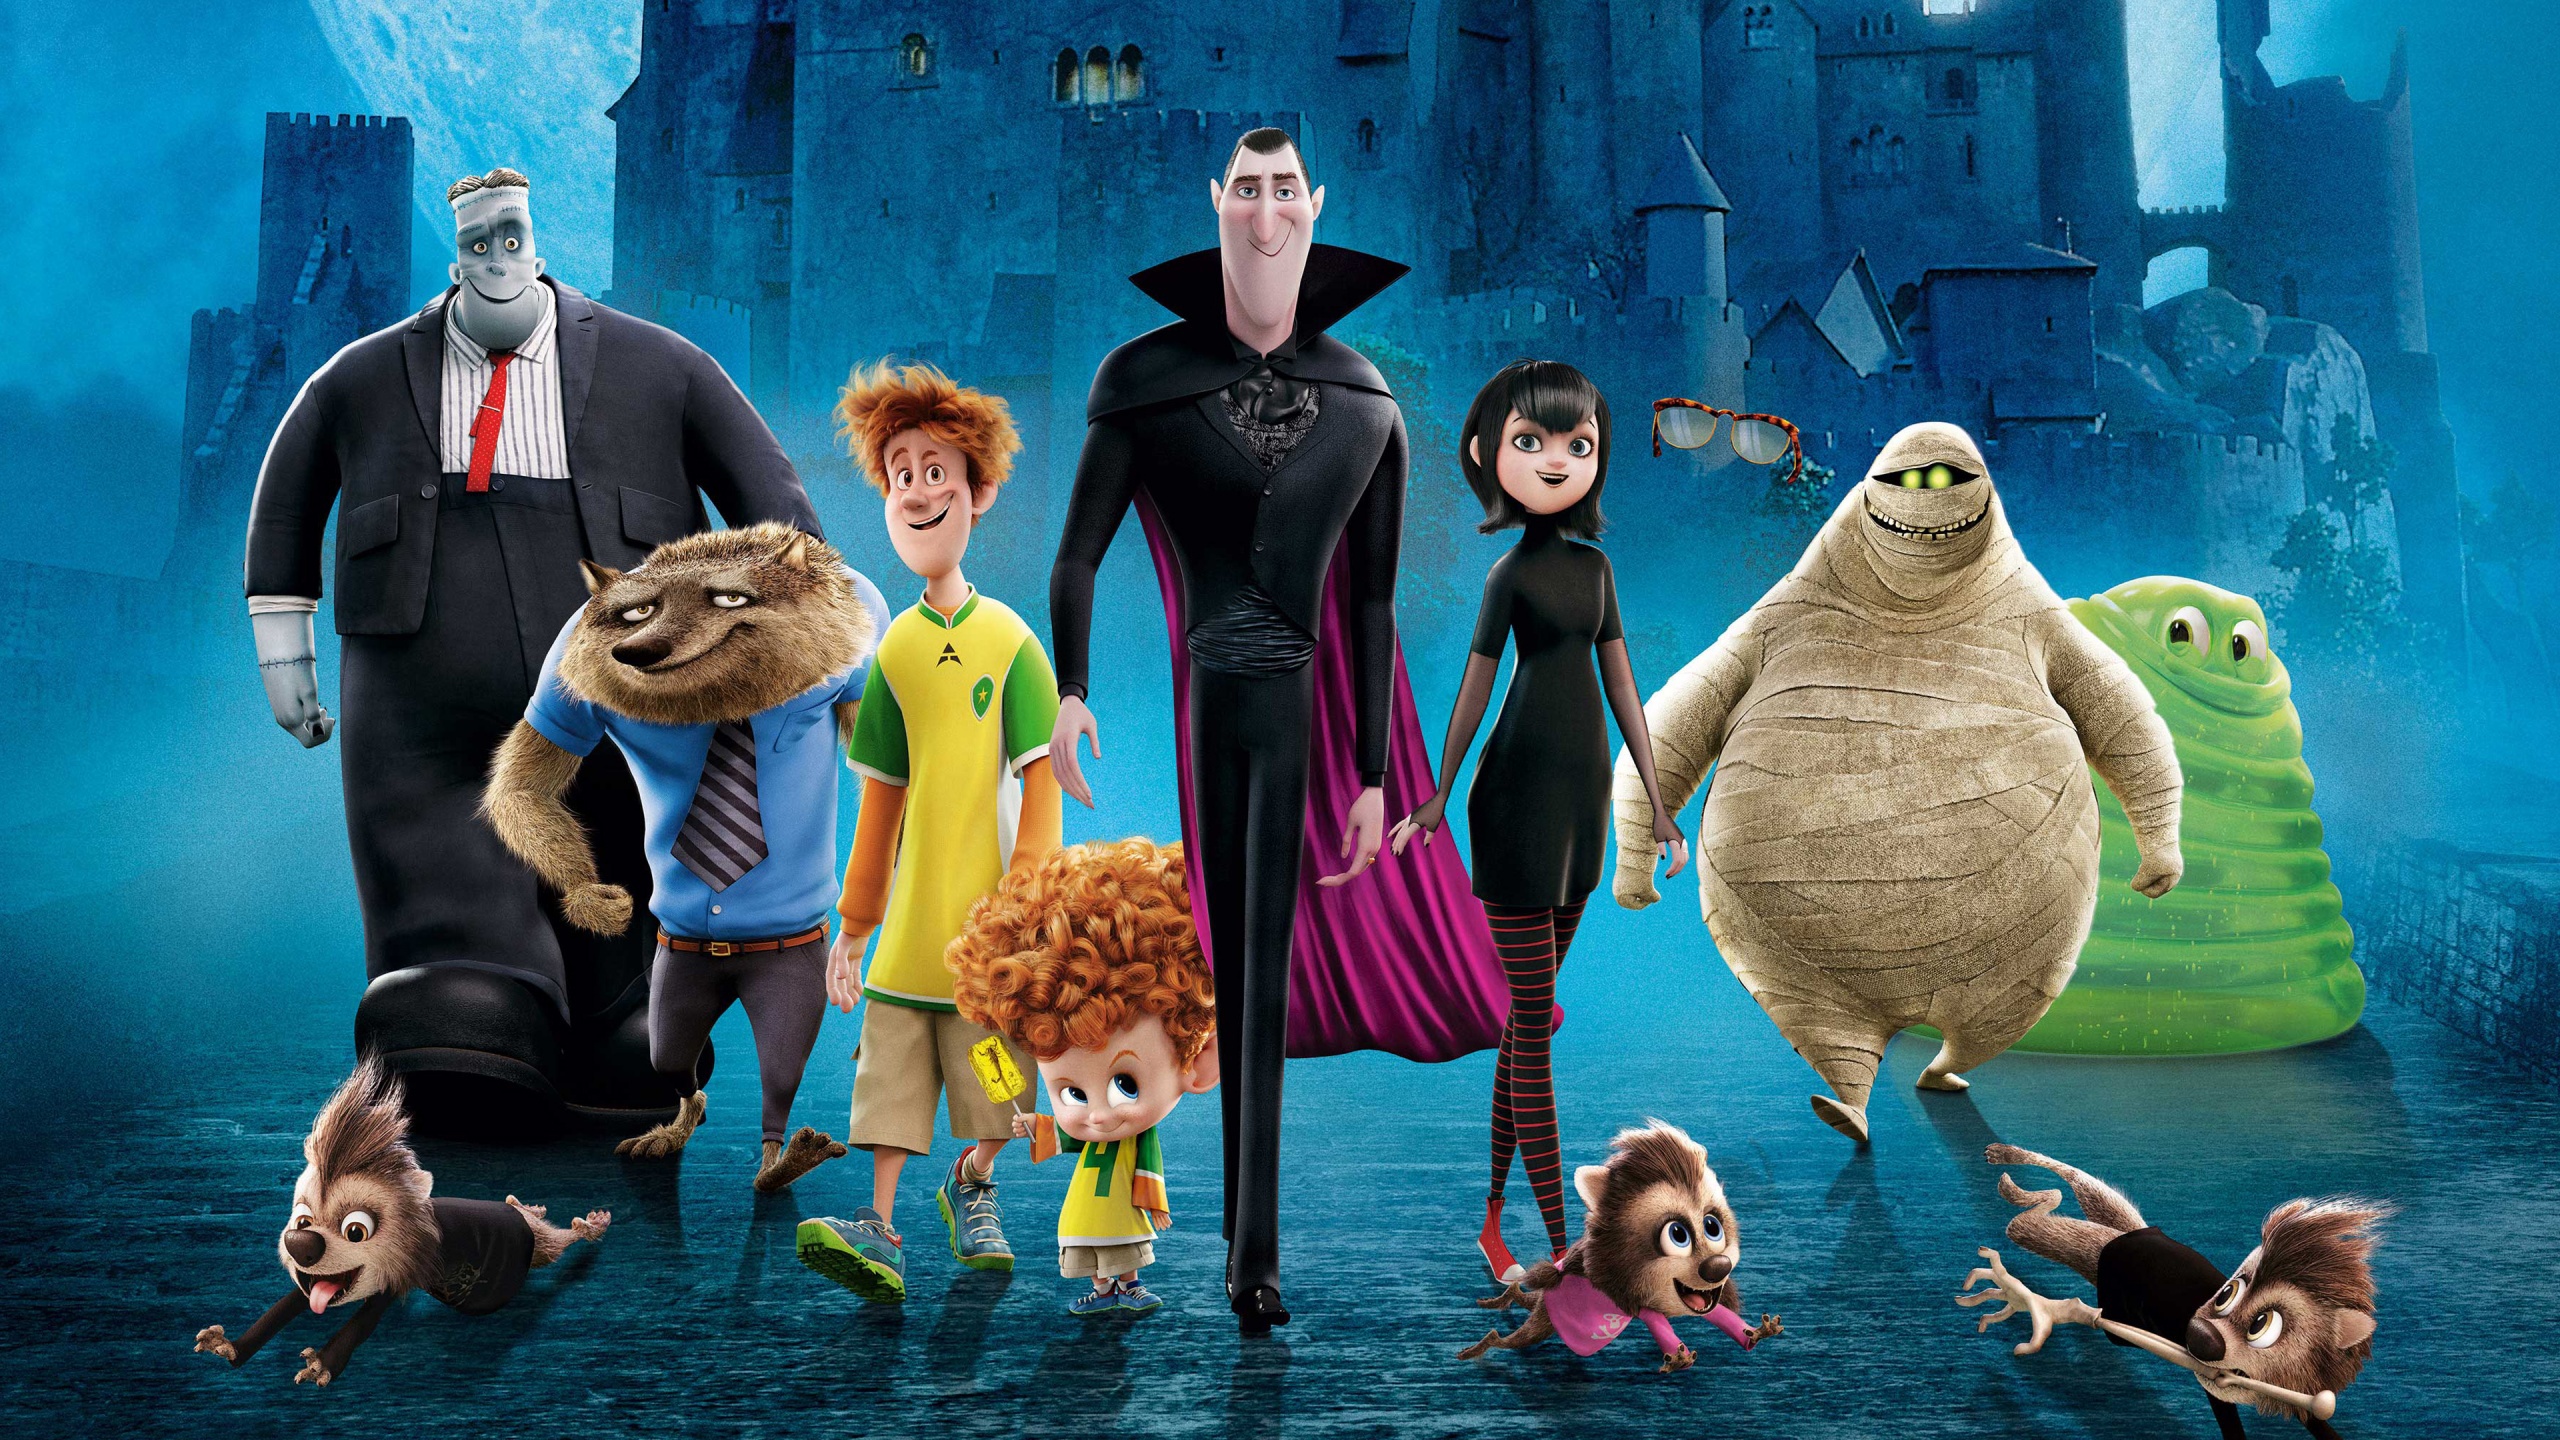 Hotel Transylvania Wallpaper Image Photos Pictures Background